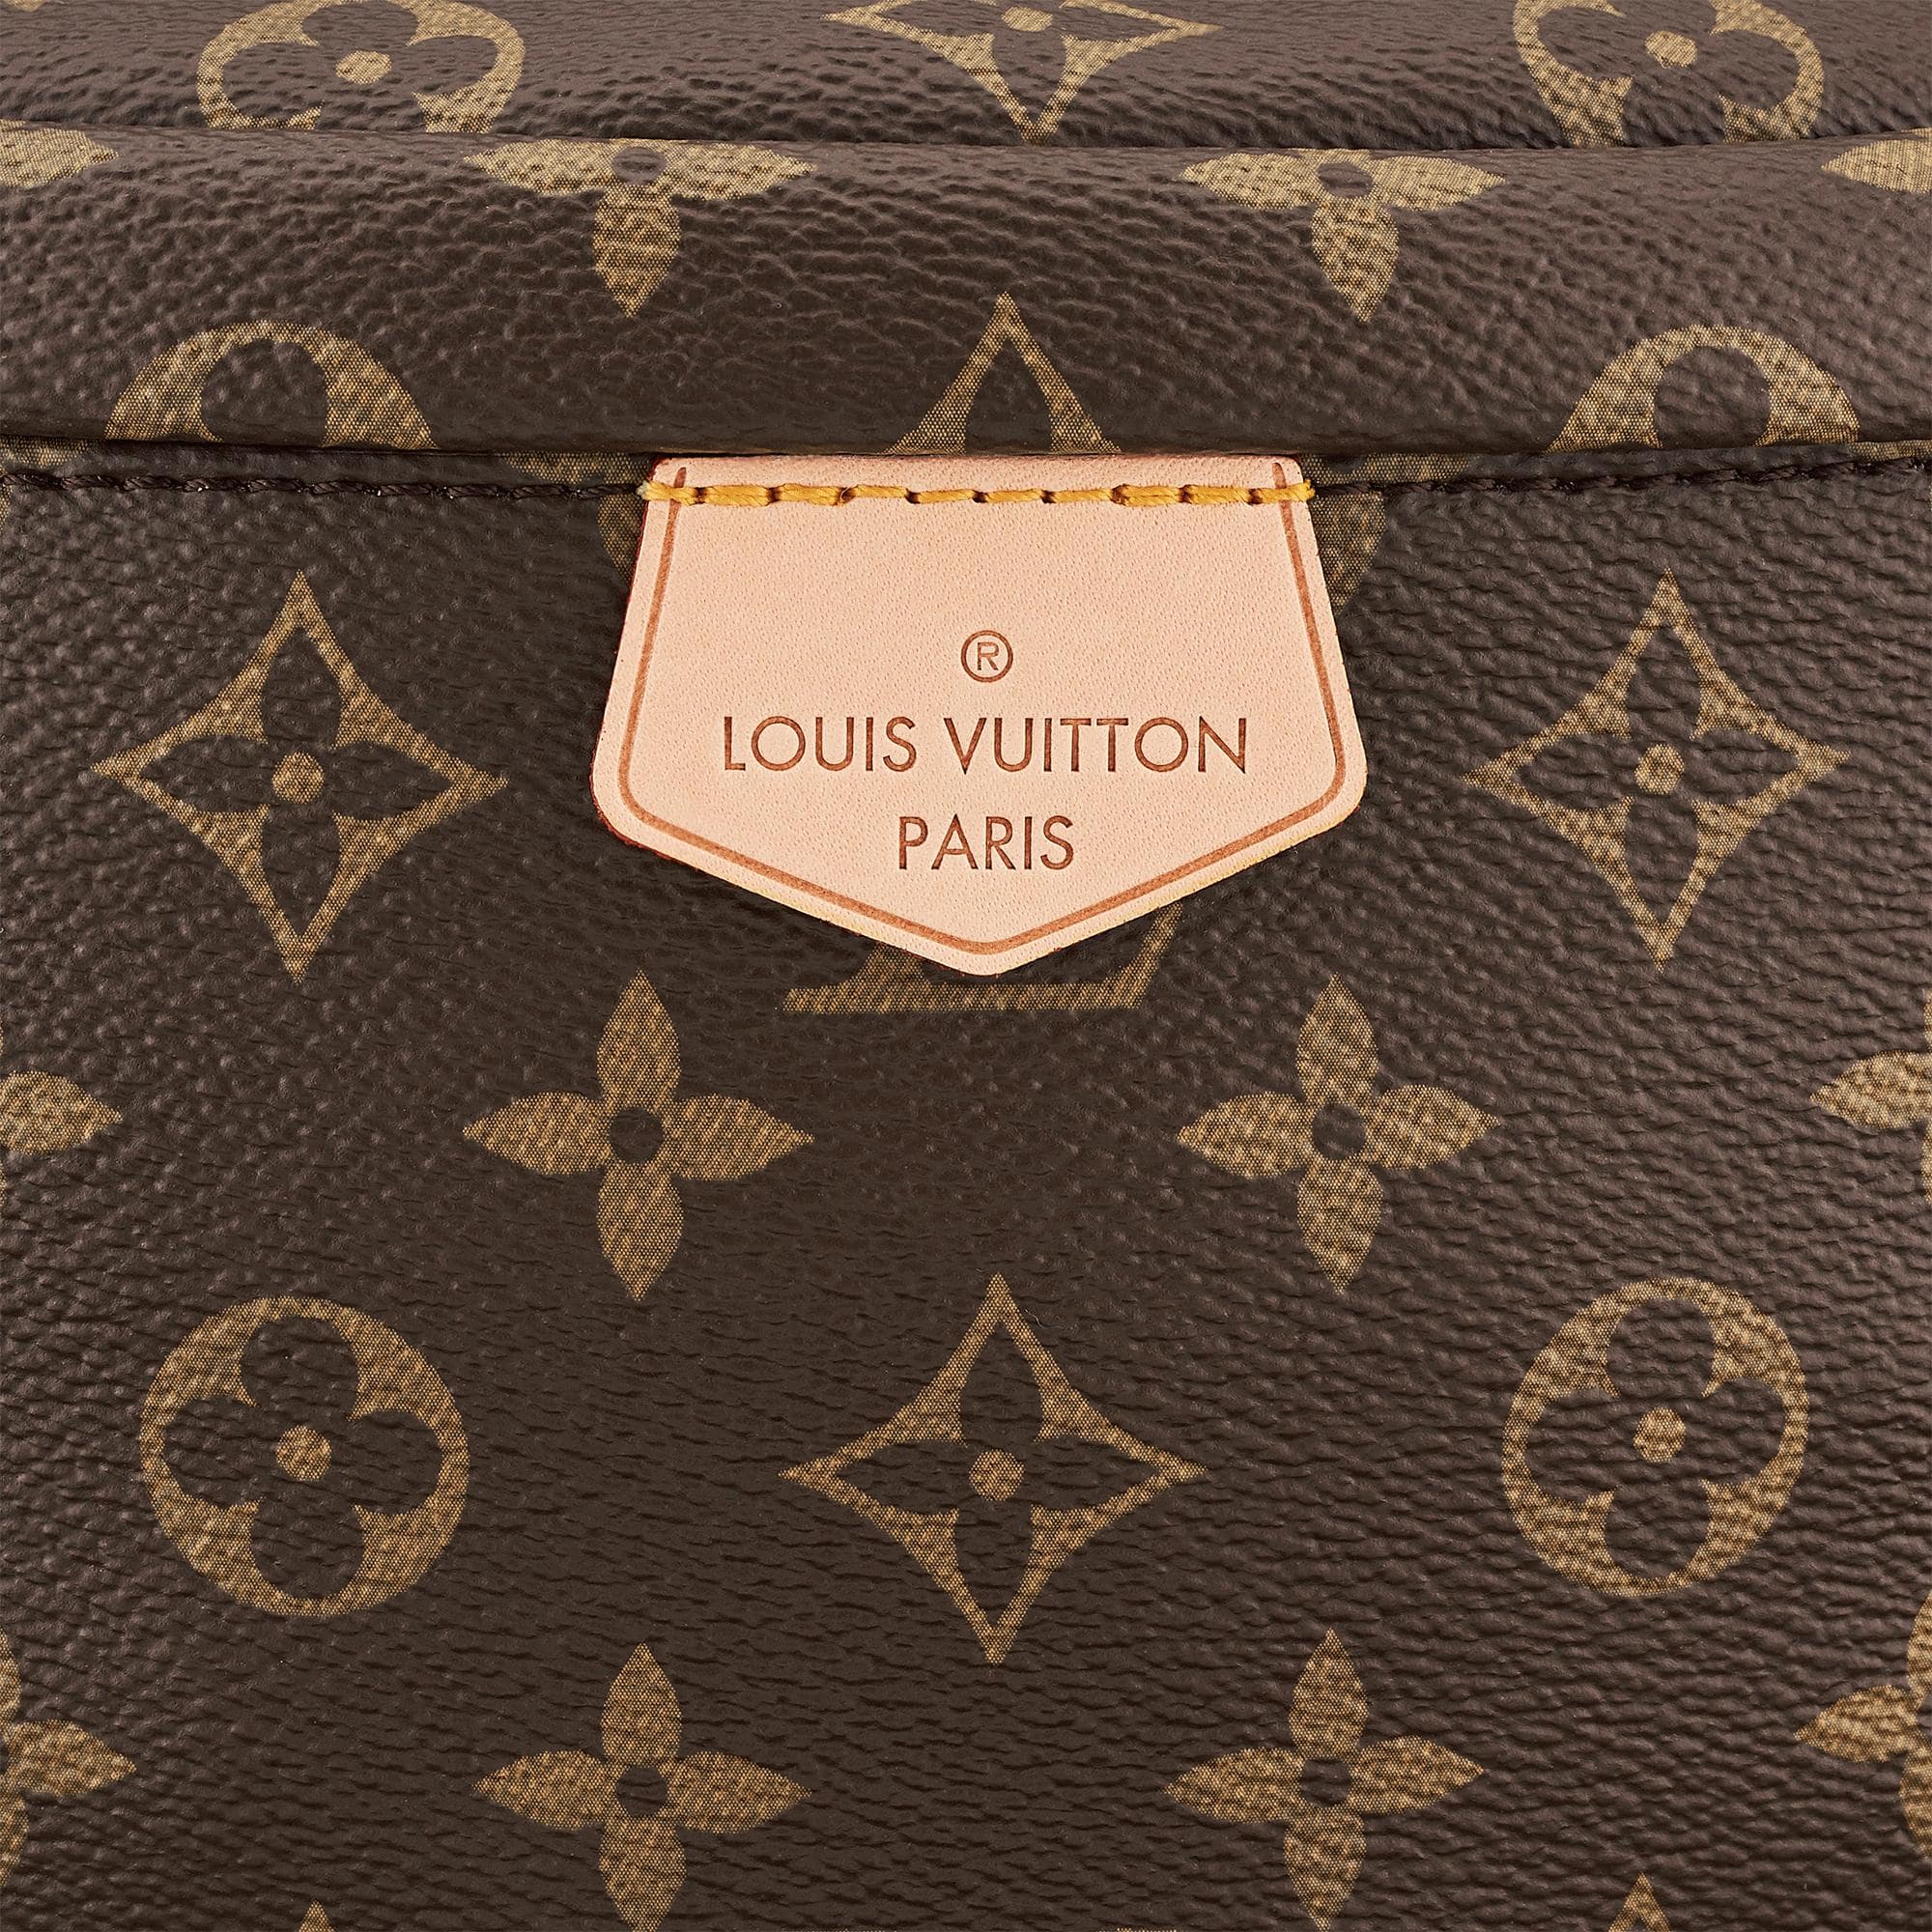 Storytelling With Louis Vuitton